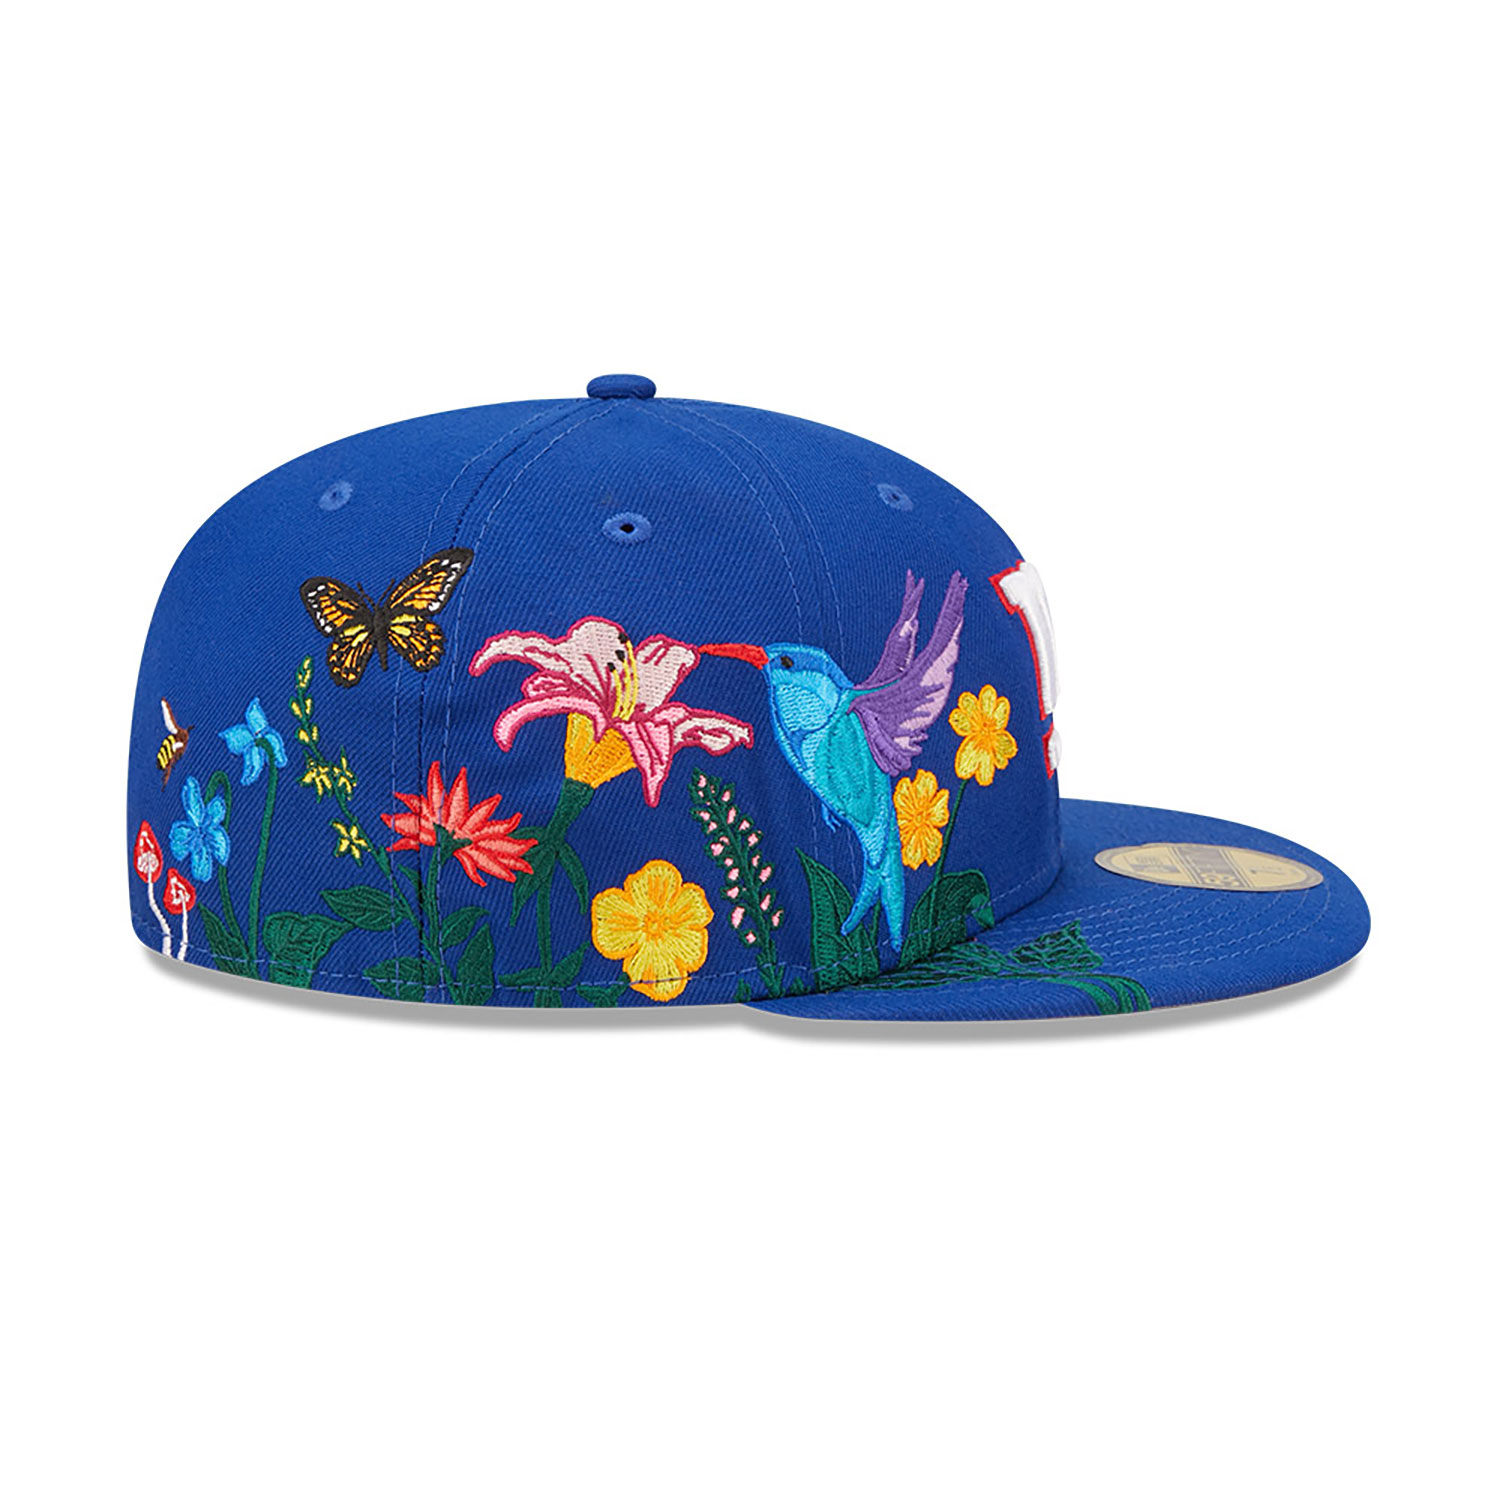 New York Giants NFL Blooming Blue 59FIFTY Fitted Cap